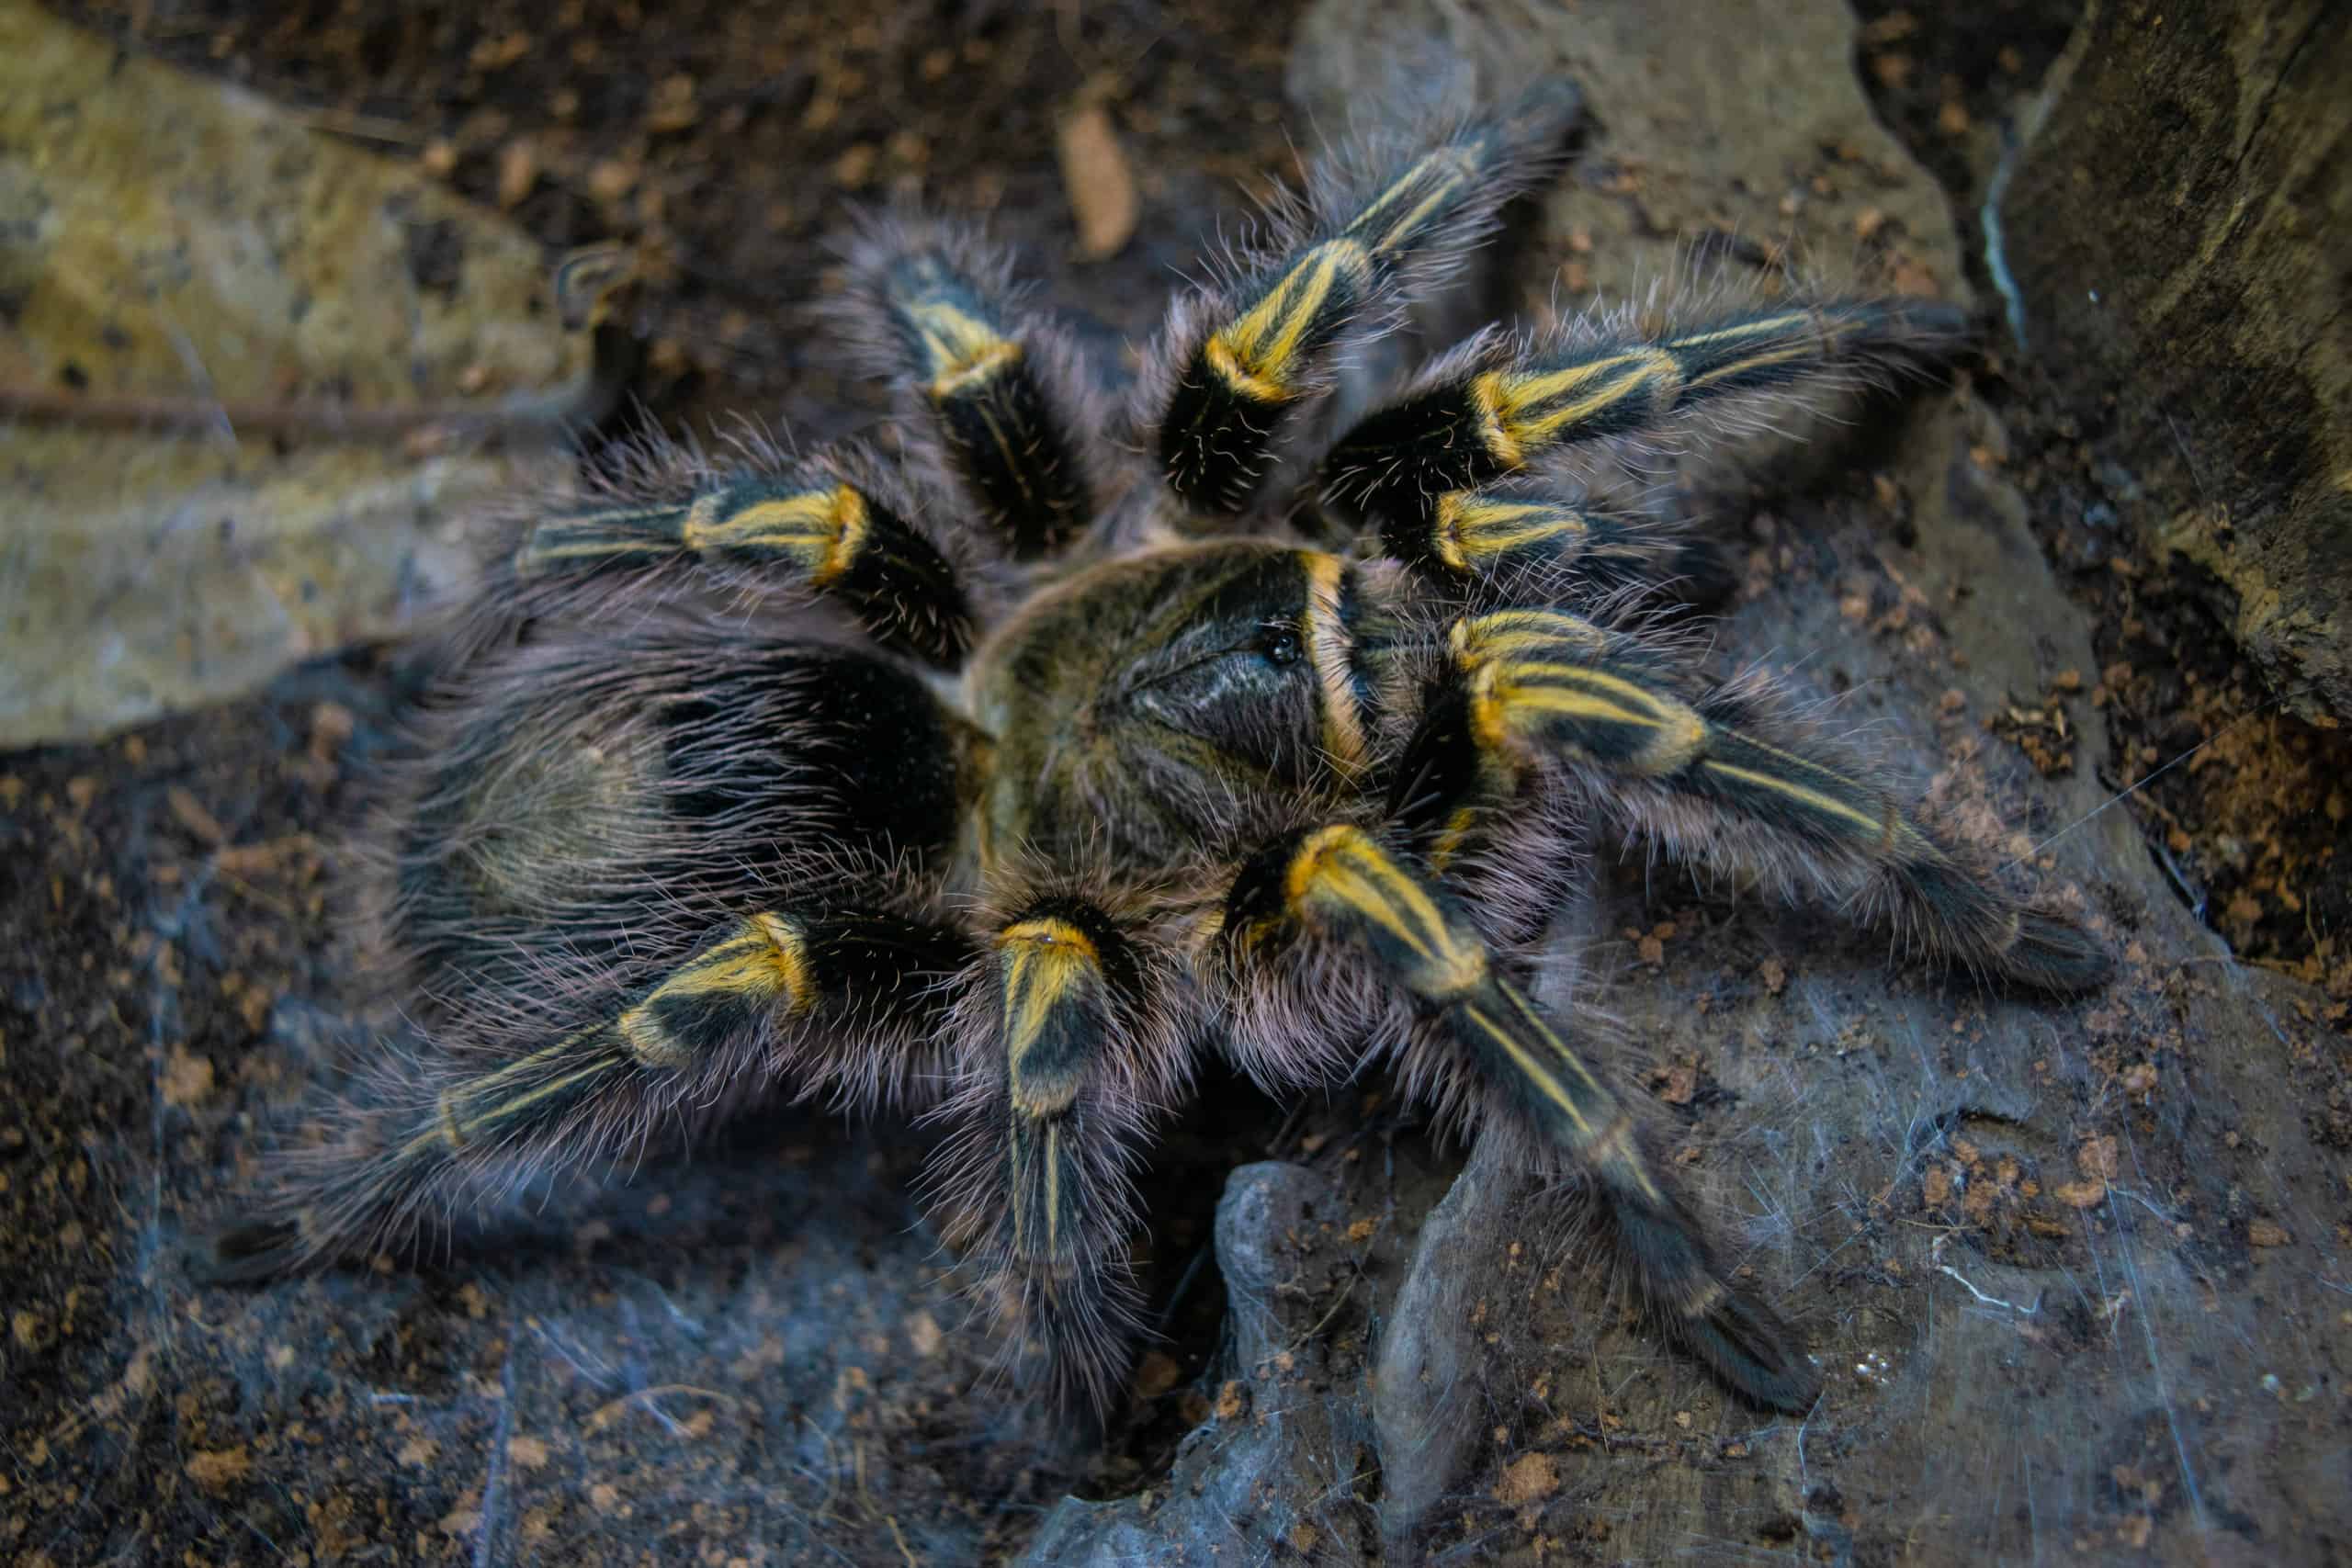 <p>The Chaco golden knee tarantula is a pretty black and gold spider. The spider calls Paraguay and Argentina home and has a large leg span of 7 inches. </p>